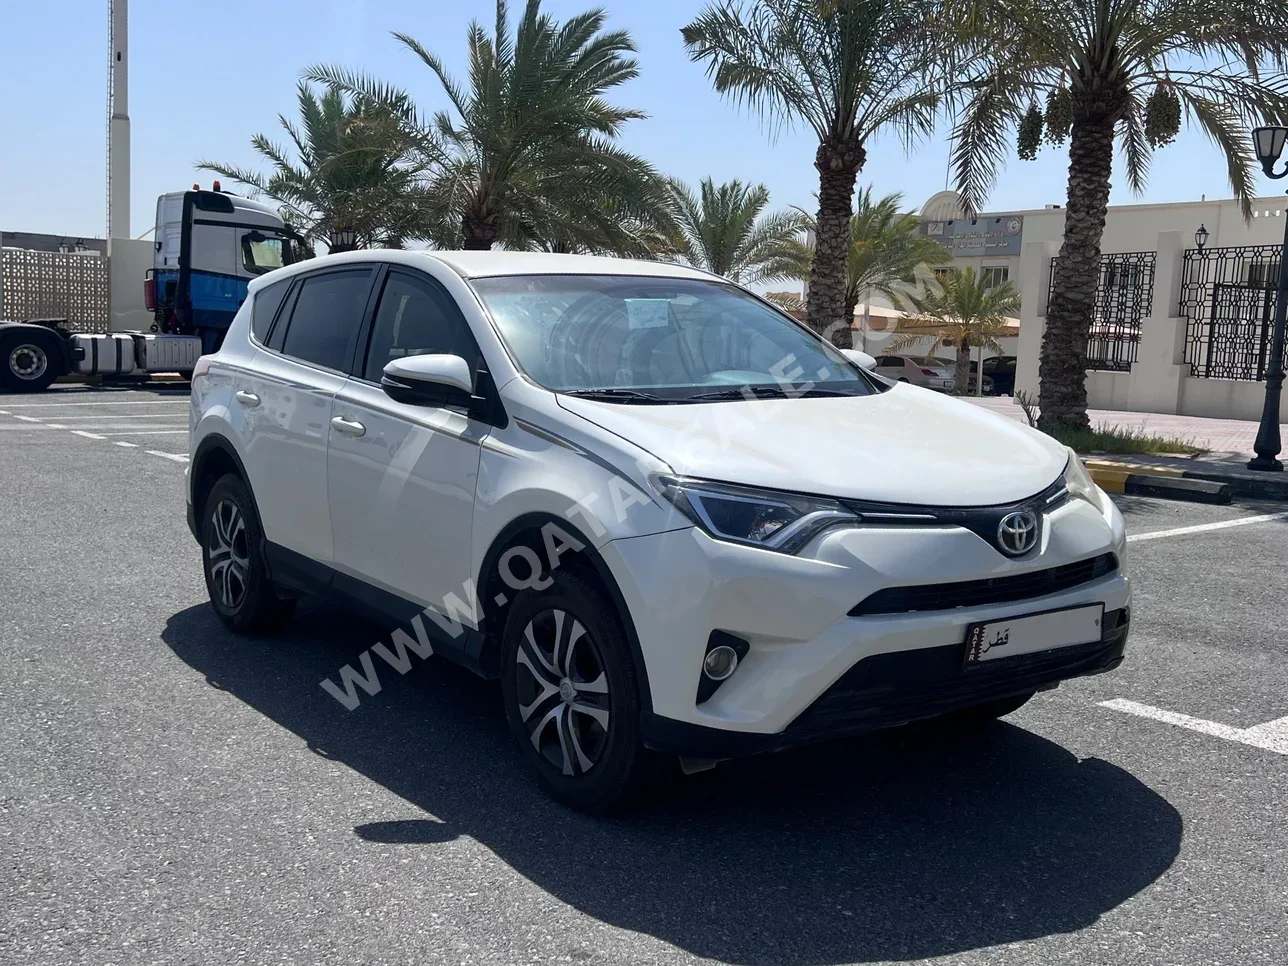  Toyota  Rav 4  2017  Automatic  191,000 Km  4 Cylinder  Front Wheel Drive (FWD)  SUV  White  With Warranty